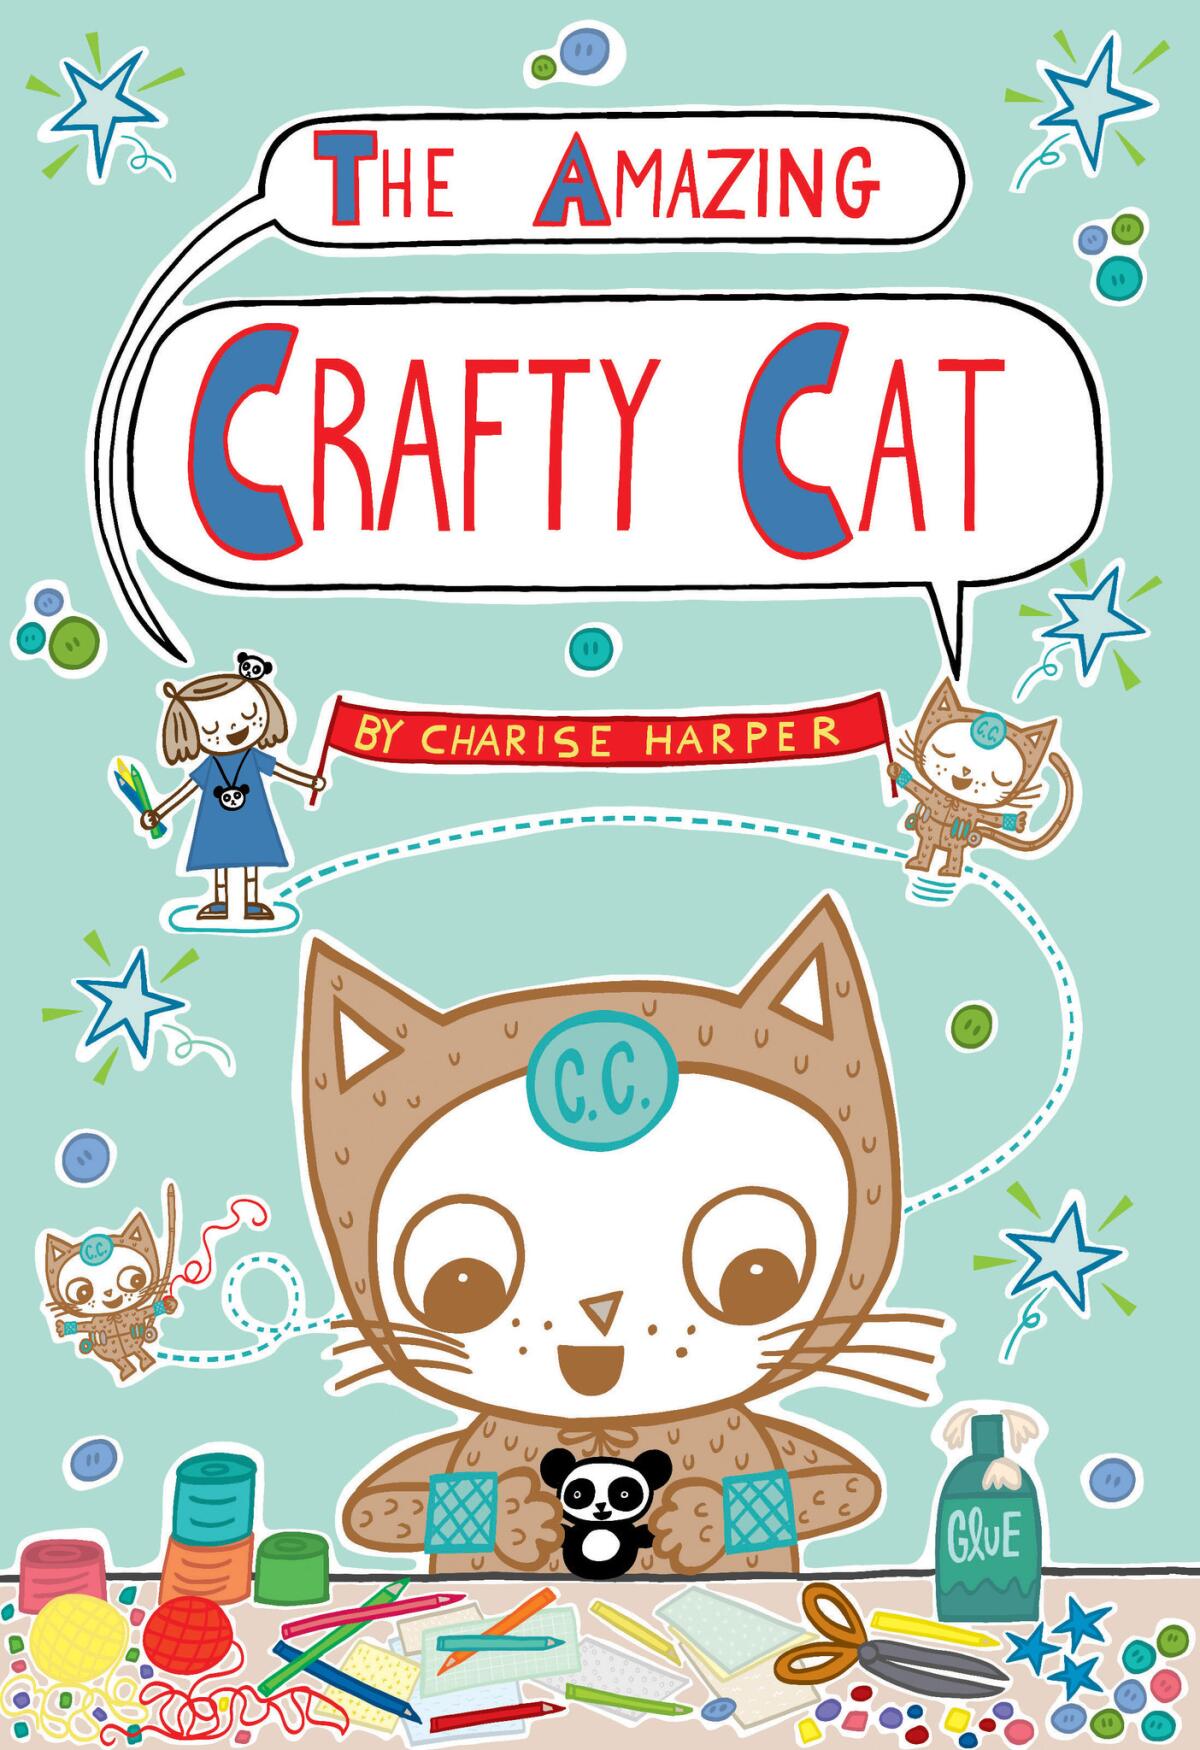 The cover for Cherise Mericle Harper's "The Amazing Crafty Cat." (Charise Mericle Harper / First Second Books)